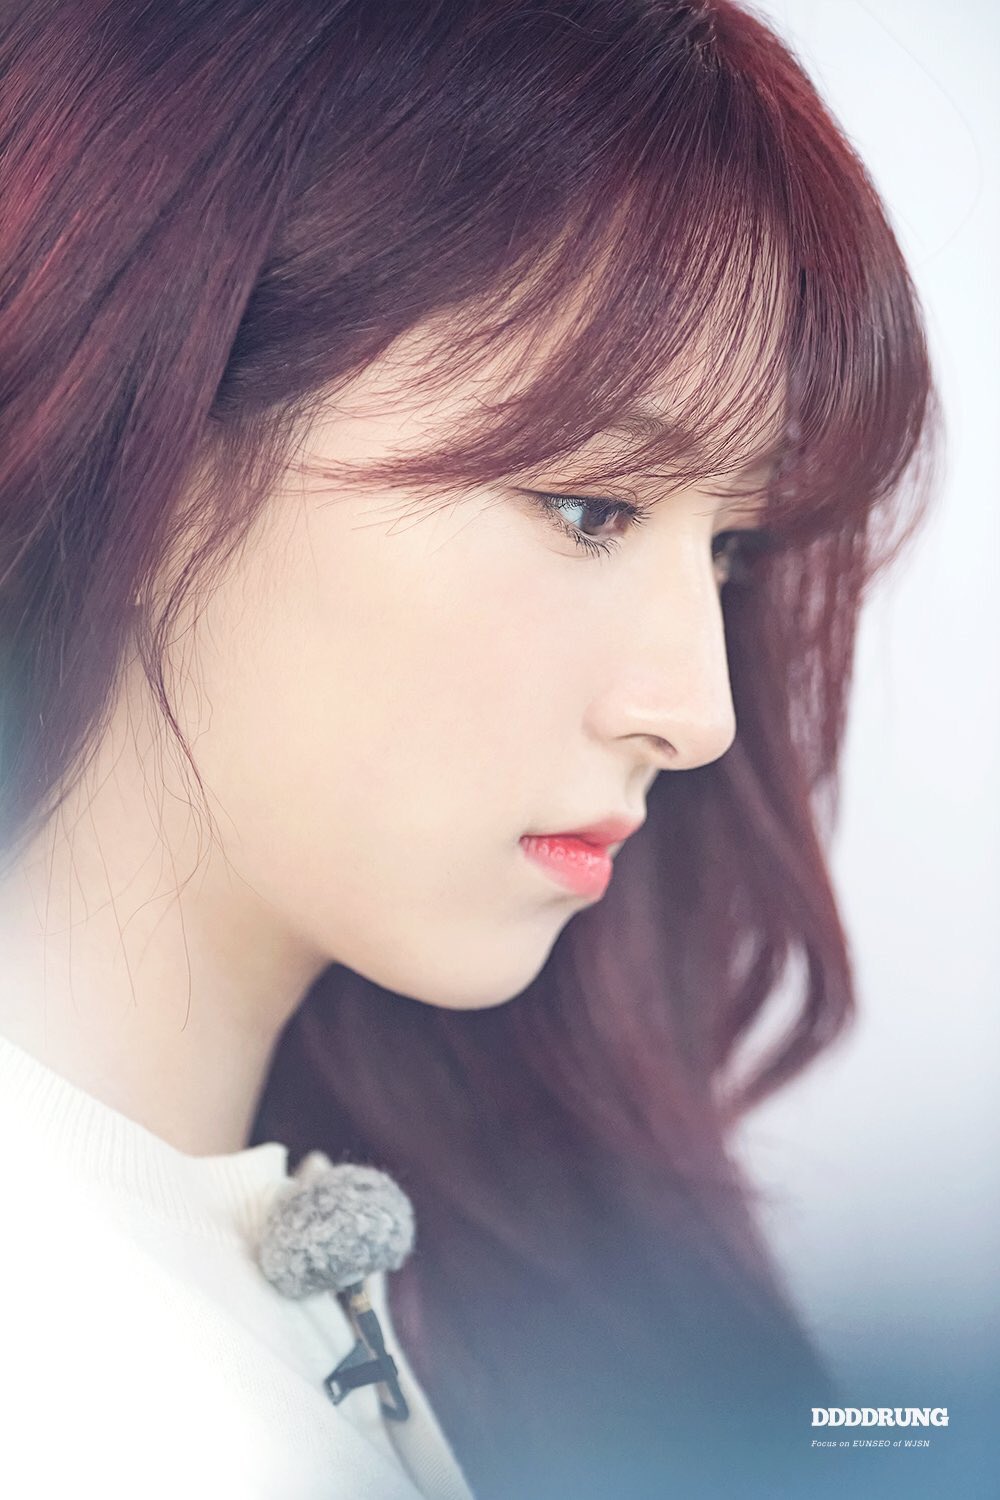 WJSN's Eunseo Garners Attention With Her New Hair Color! | Daily K Pop News